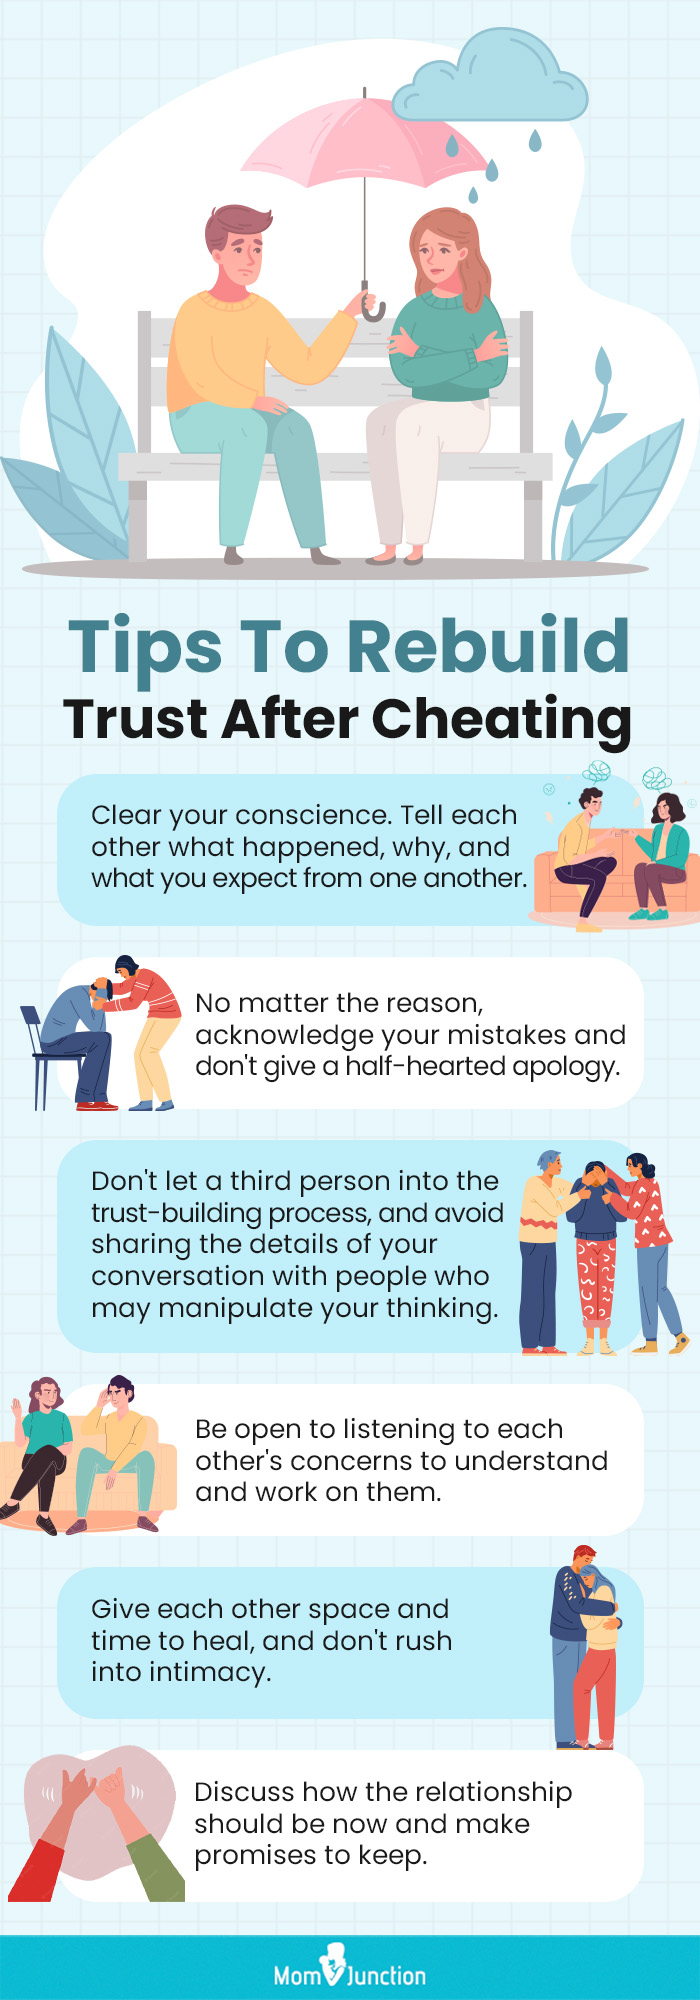 tips to rebuild trust after cheating [infographic]